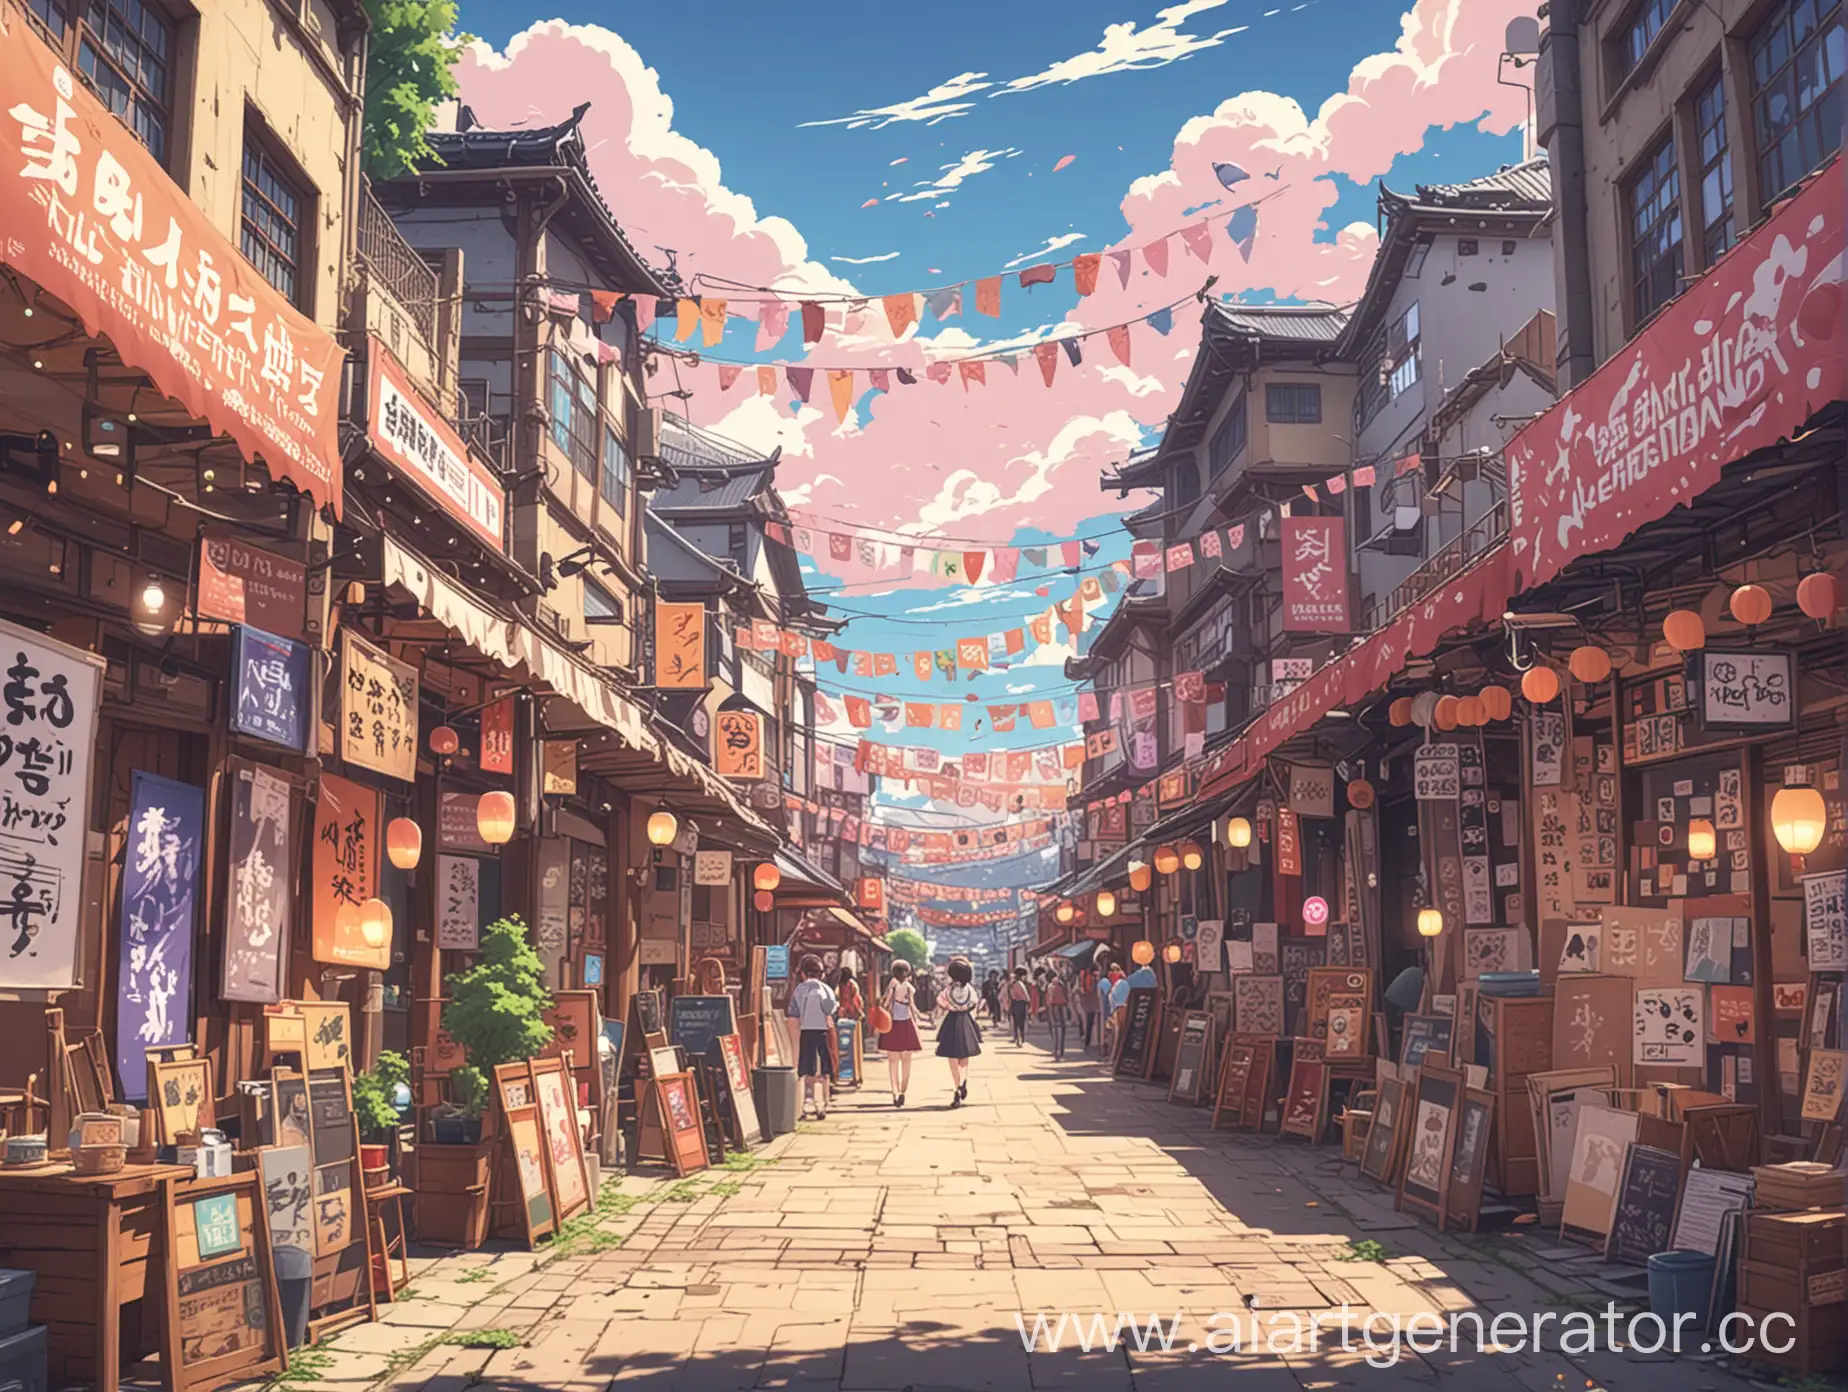 Colorful-Anime-Festival-Background-with-Cosplayers-and-Decorations